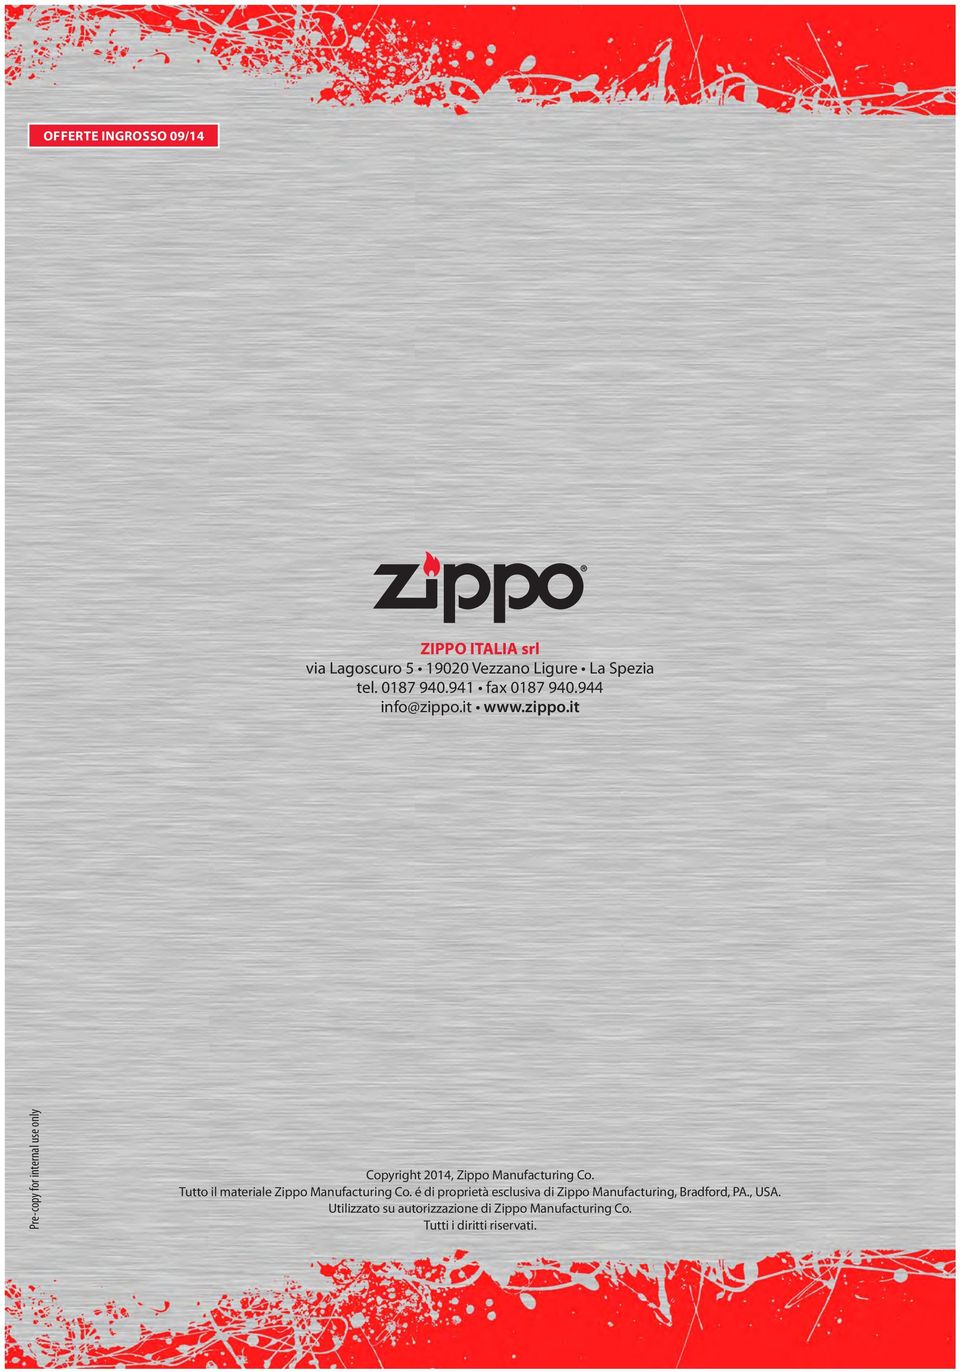 it www.zippo.it Pre-copy for internal use only Copyright 2014, Zippo Manufacturing Co.